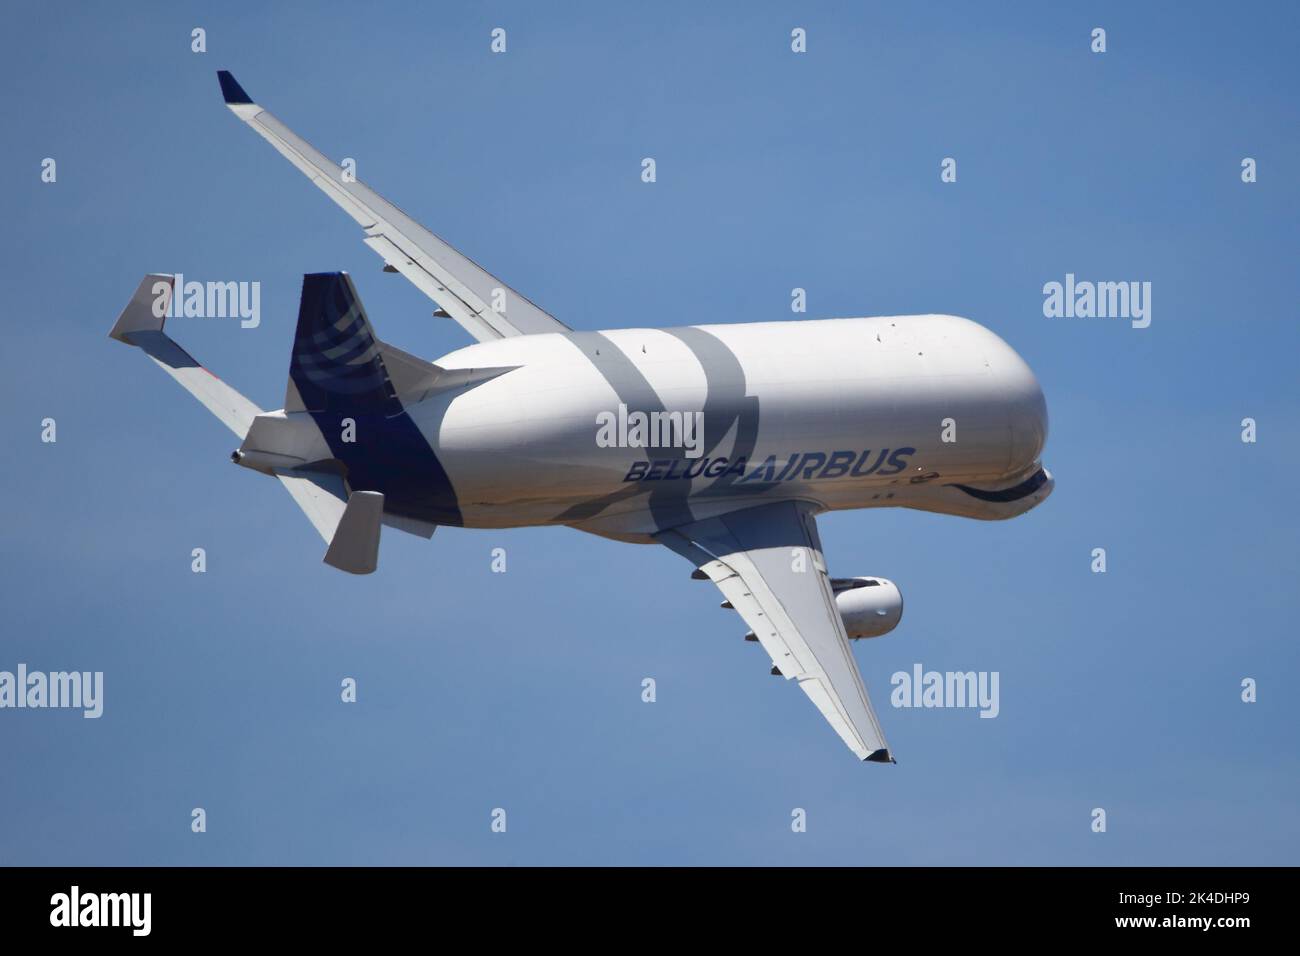 Fairford, UK. 16th July, 2022. Military and civilian aircraft from across the globe on display for the RIAT Royal International Air Tattoo. The Airbus Beluga XL made a rare appearance to the delight of the audience. Stock Photo